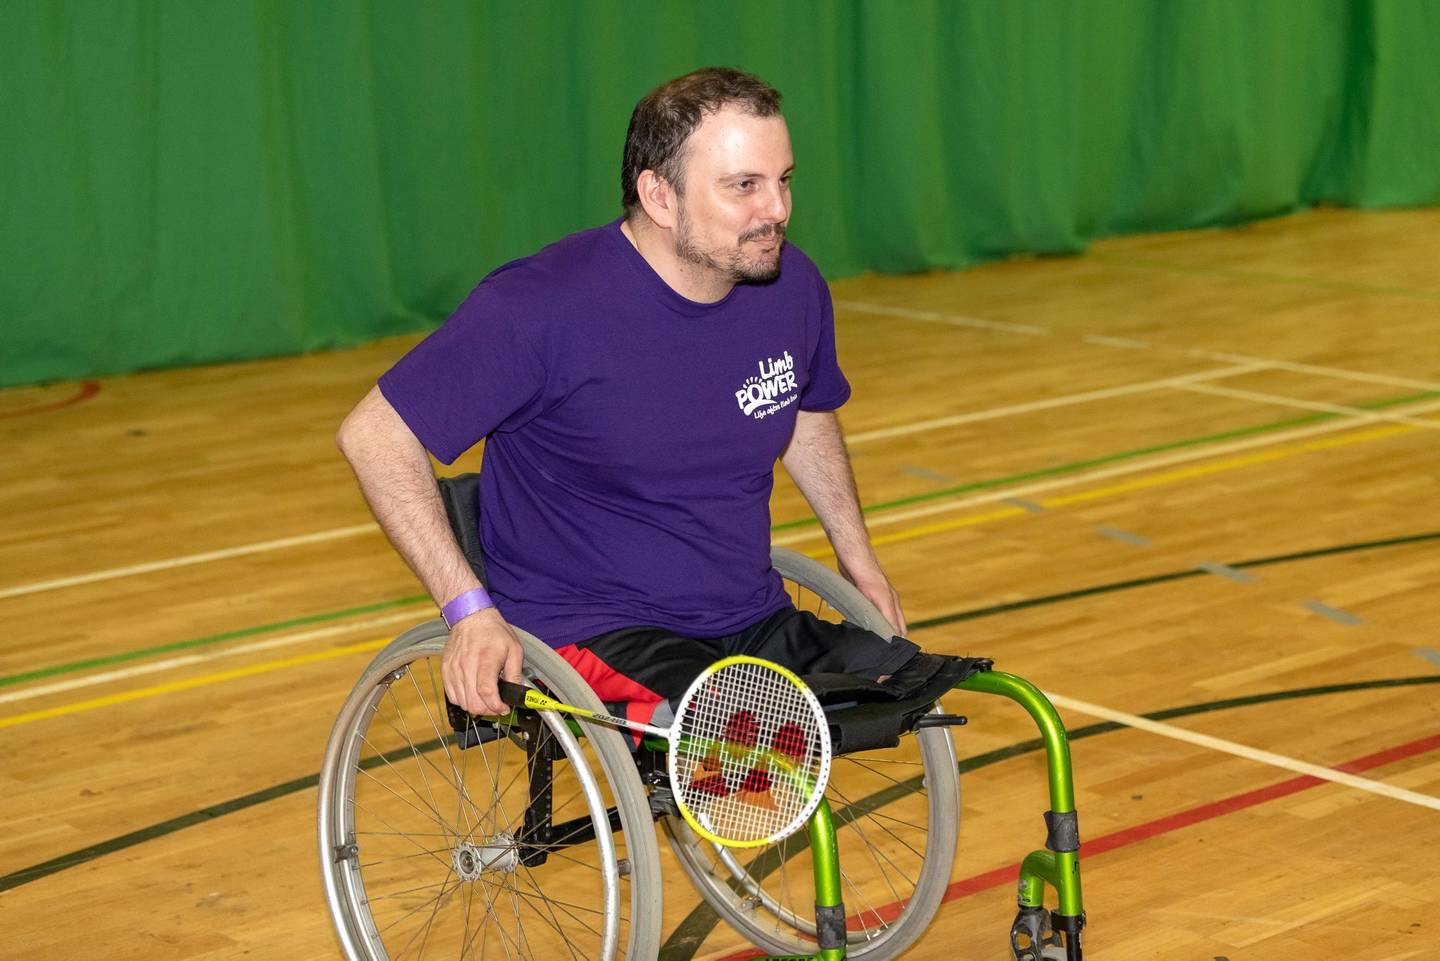 David in his wheelchair playing tennis